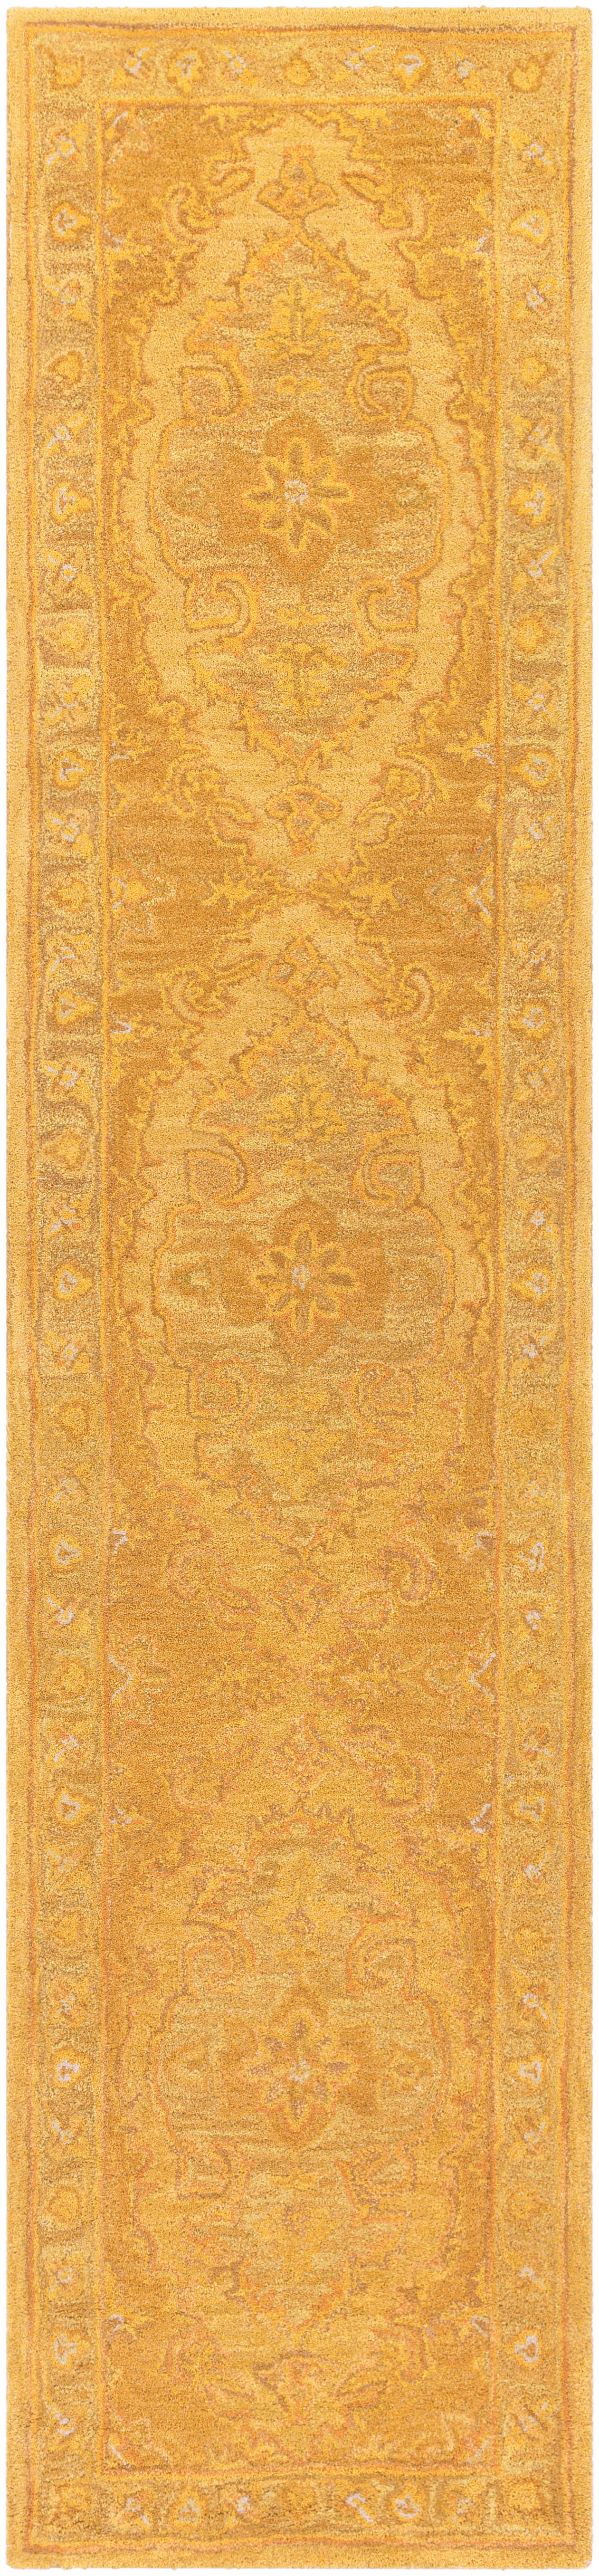 Middleton 21116 Hand Tufted Wool Indoor Area Rug by Surya Rugs